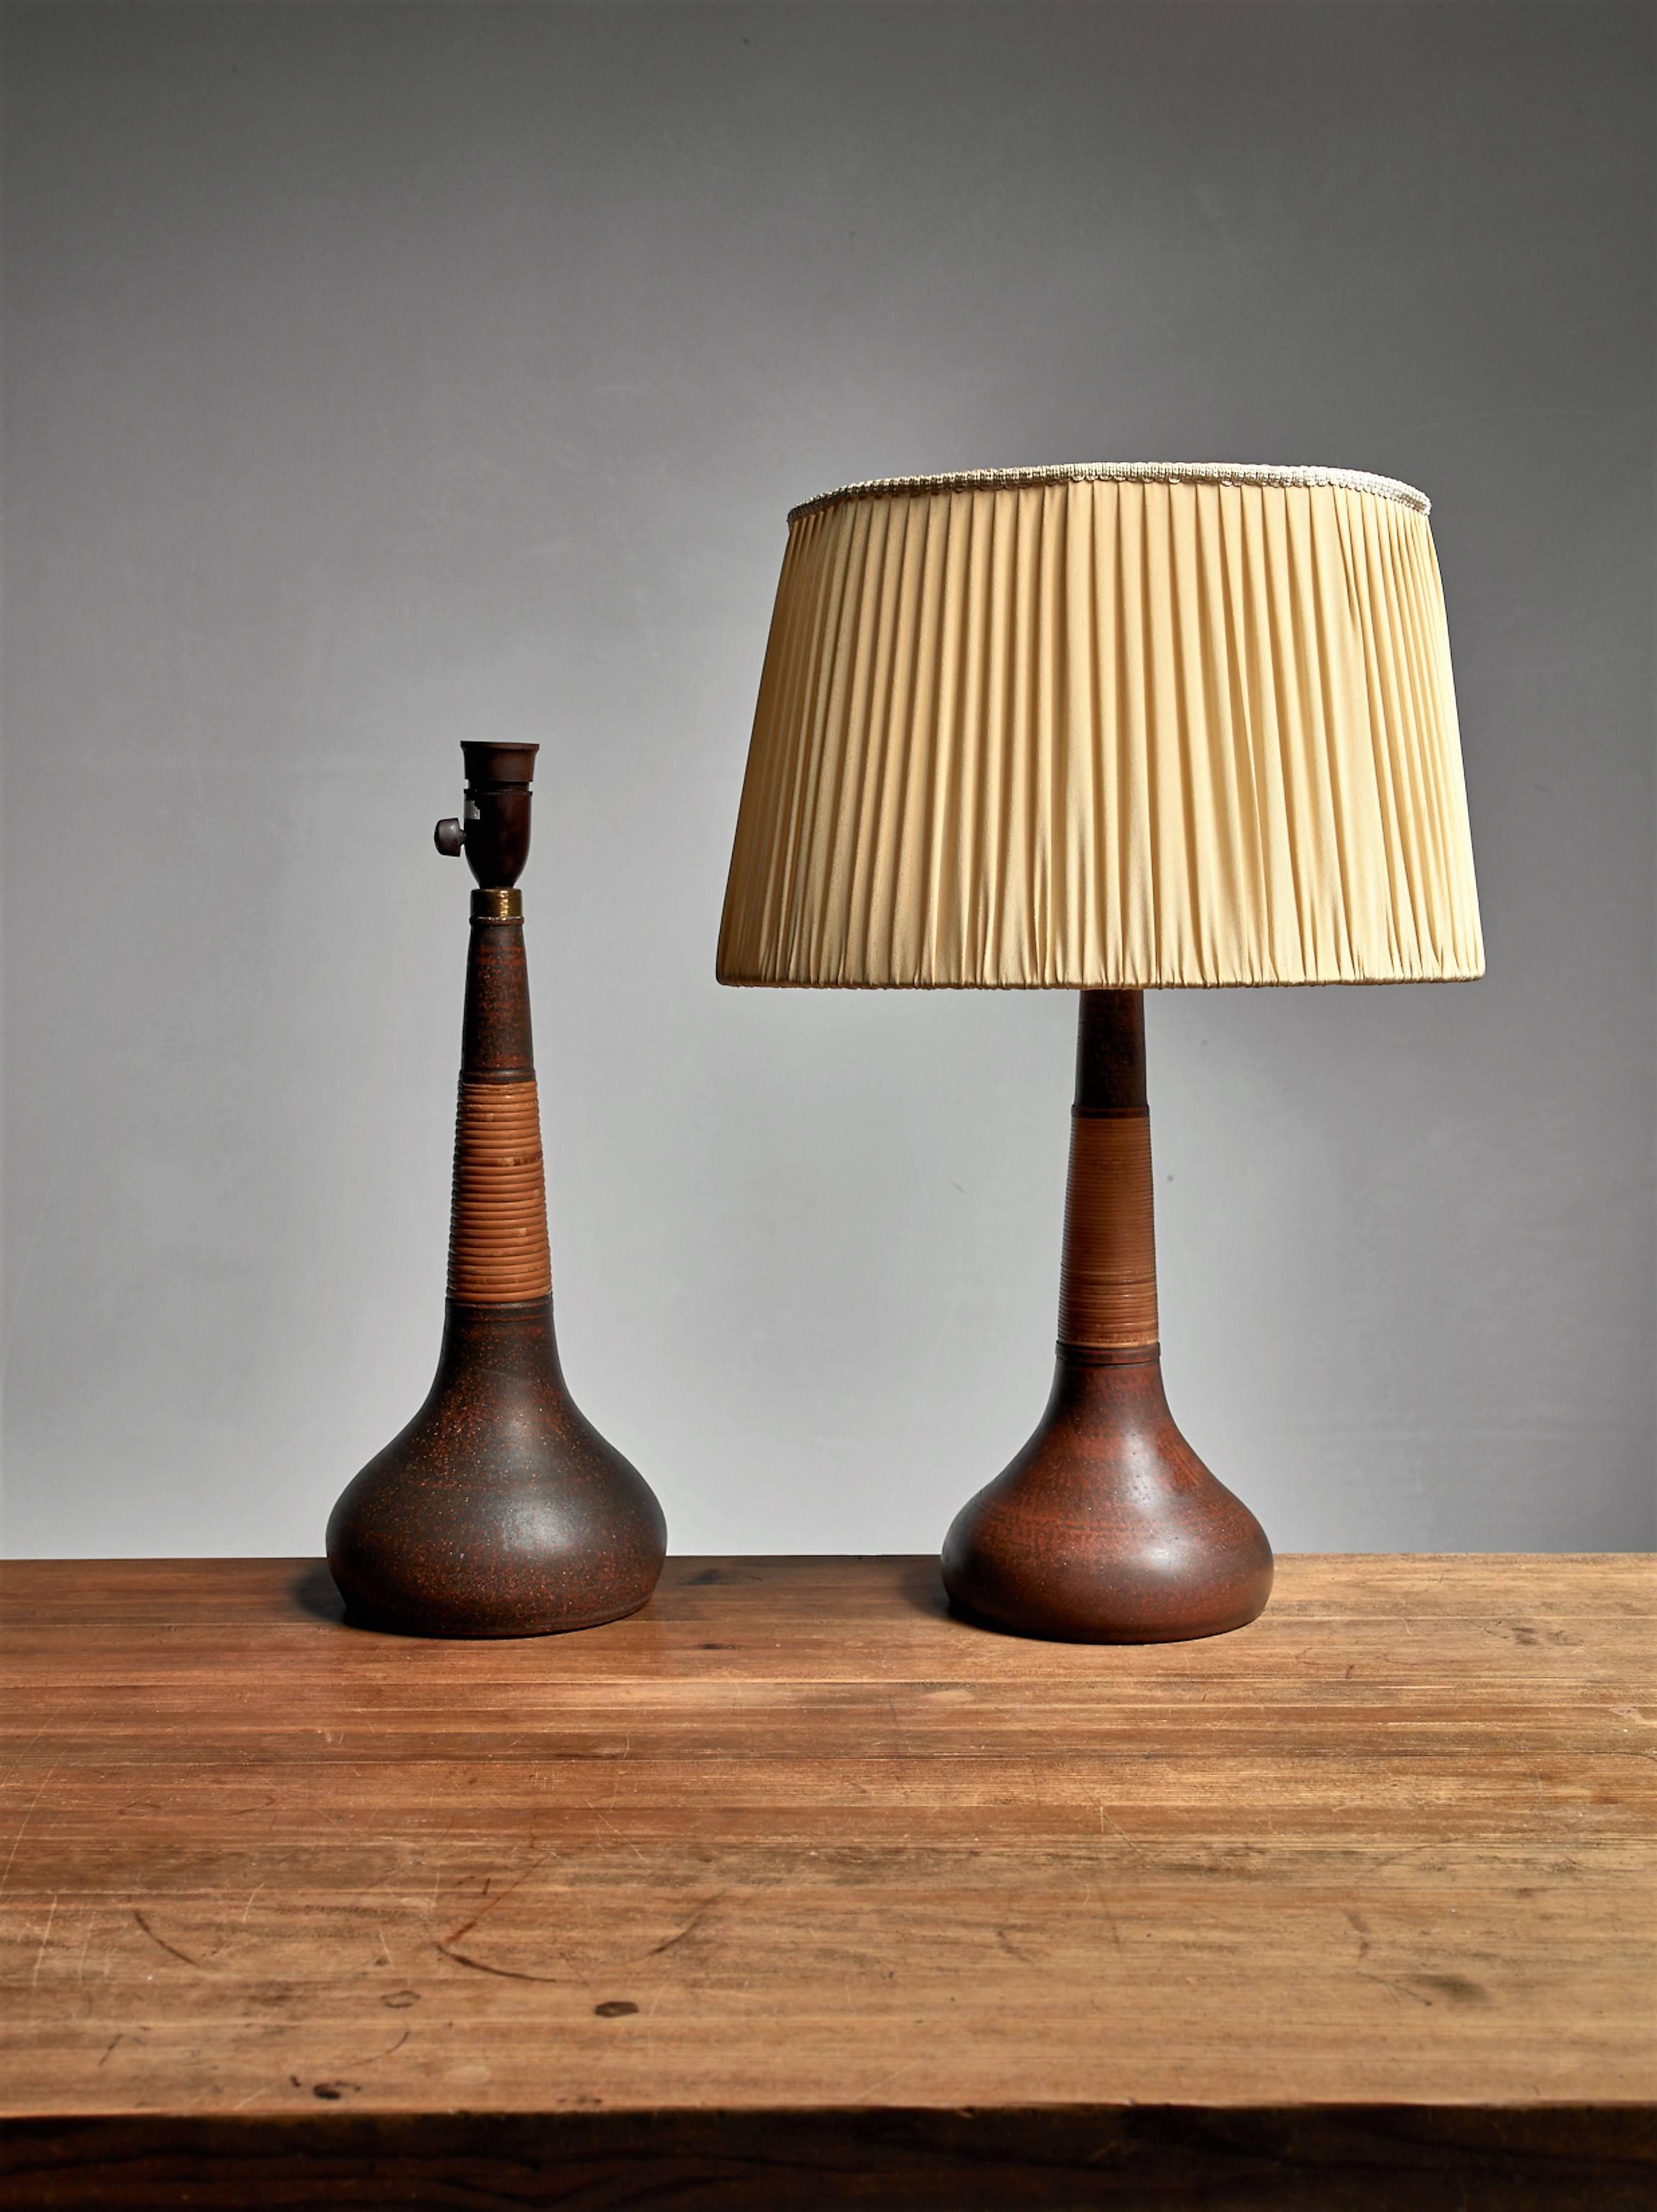 Scandinavian Modern Pair of Brown Ceramic and Rattan Table Lamps by Kähler, Denmark For Sale